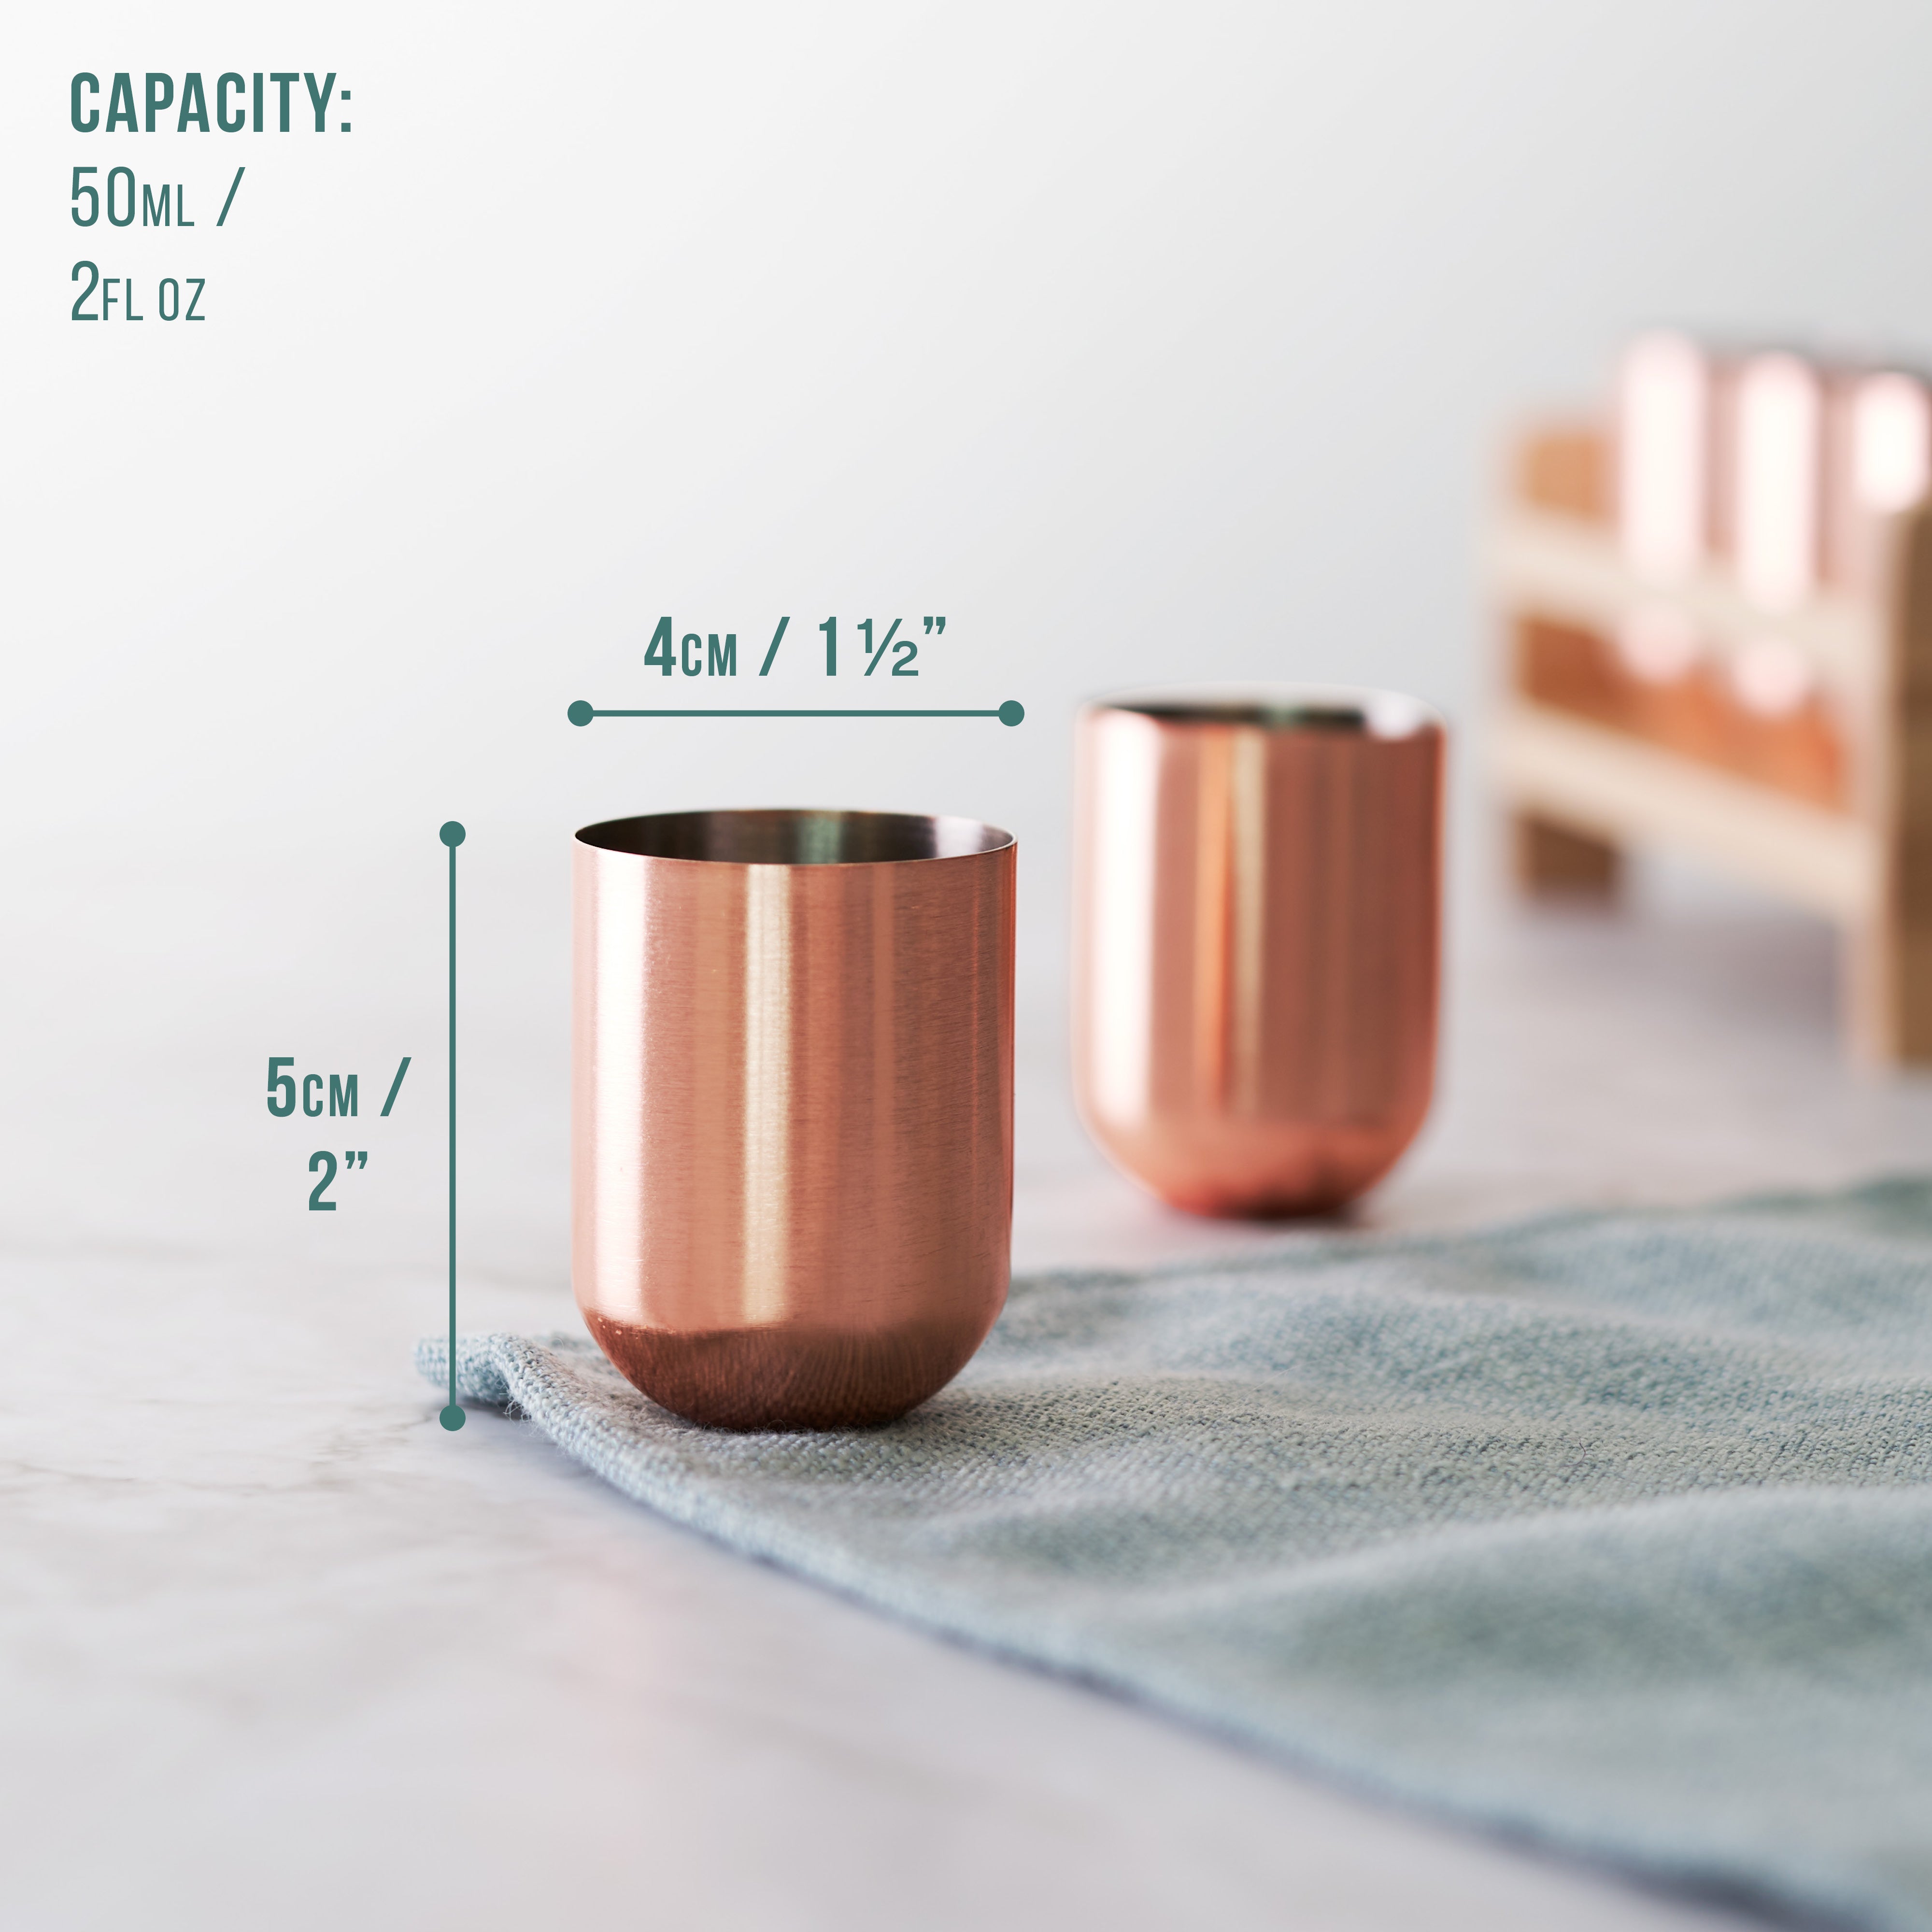 6 Rose Gold Stainless Steel Shot Glasses with Wooden Tray